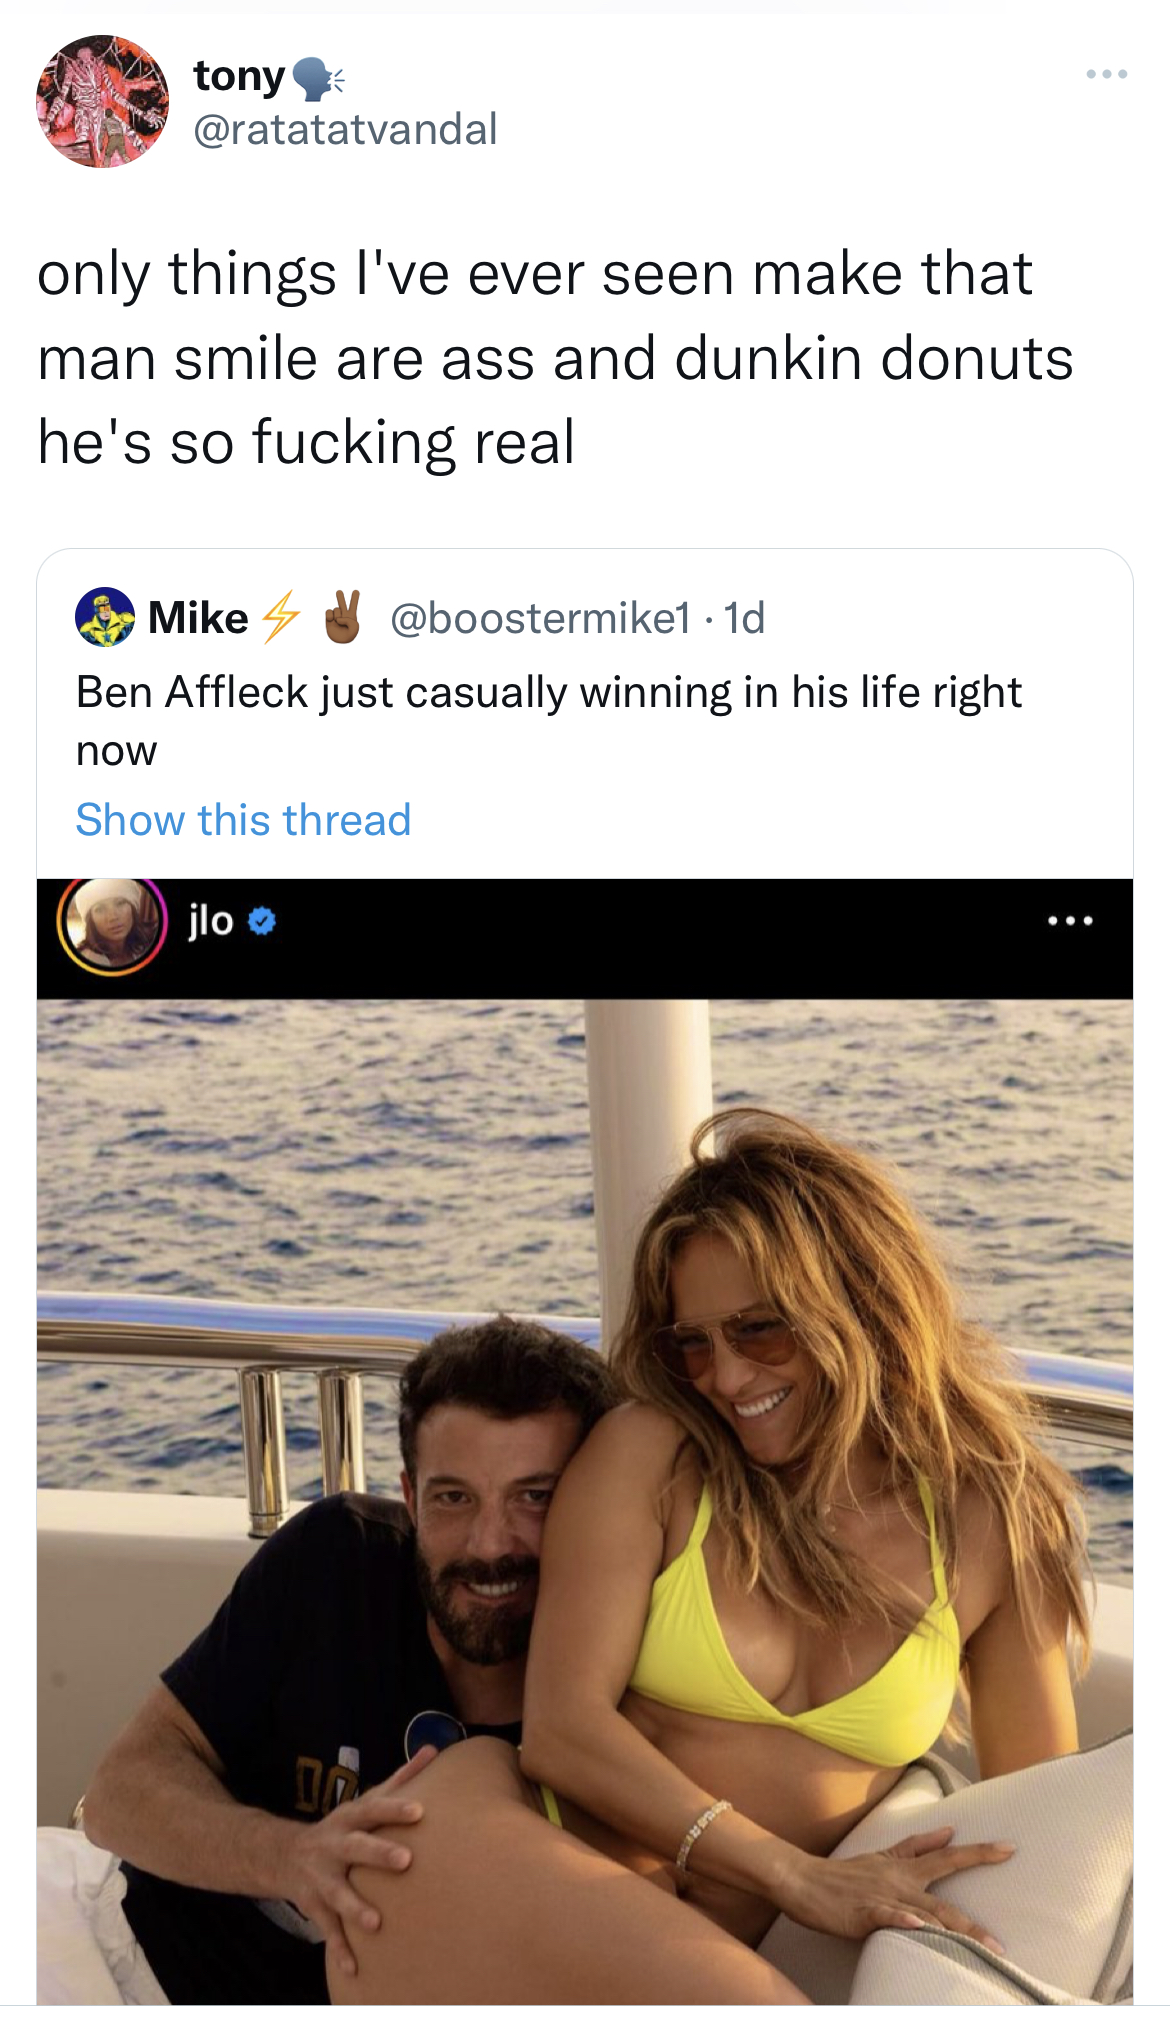 deranged tweets - Ben Affleck - tony only things I've ever seen make that man smile are ass and dunkin donuts he's so fucking real Mike Ben Affleck just casually winning in his life right now Show this thread jlo 1533